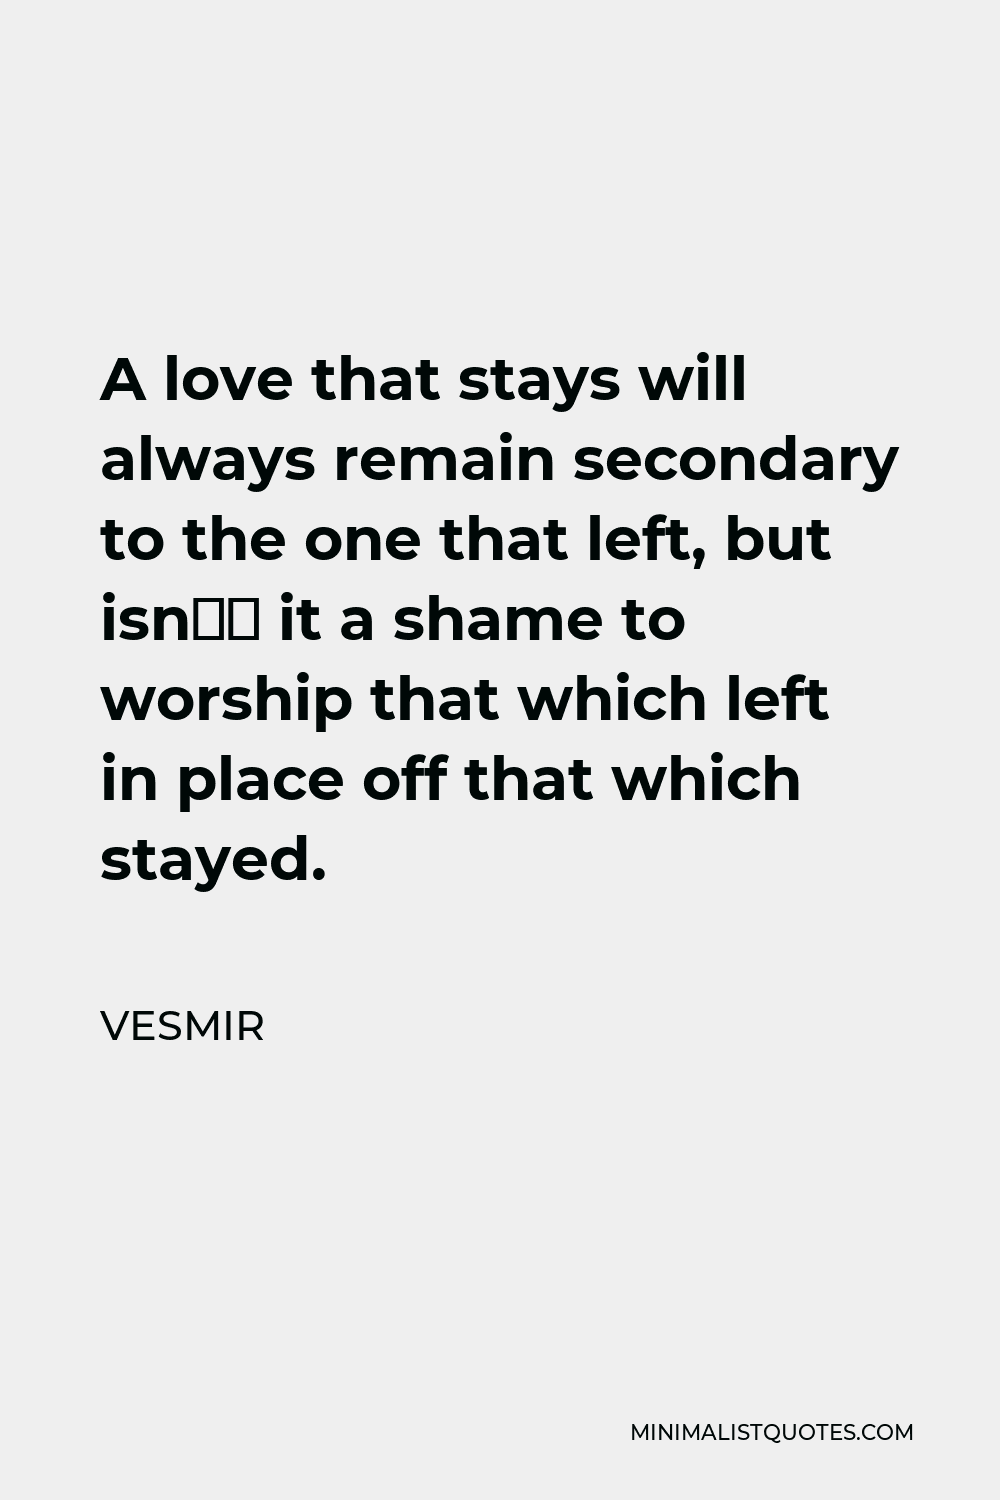 Vesmir Quote - A love that stays will always remain secondary to the one that left, but isn’t it a shame to worship that which left in place off that which stayed.